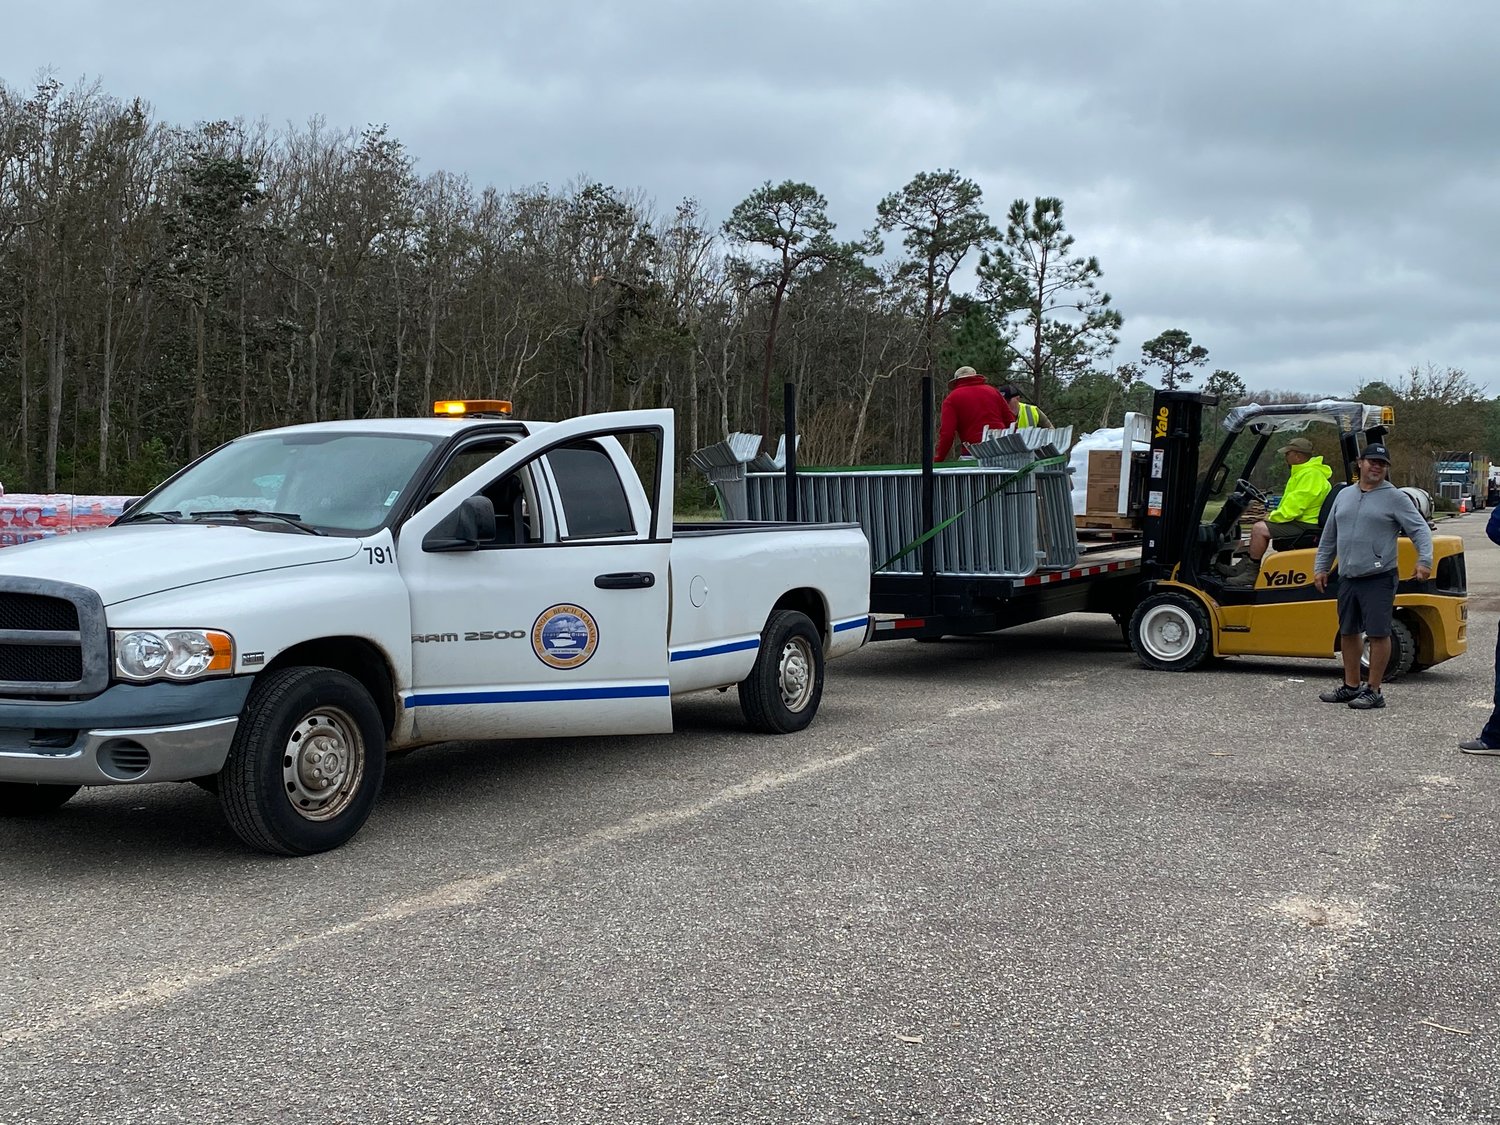 Crews at the POD loading a trailer with pallets of ice, boxes of bleach and gallons of gasoline to transport to Bear Point.